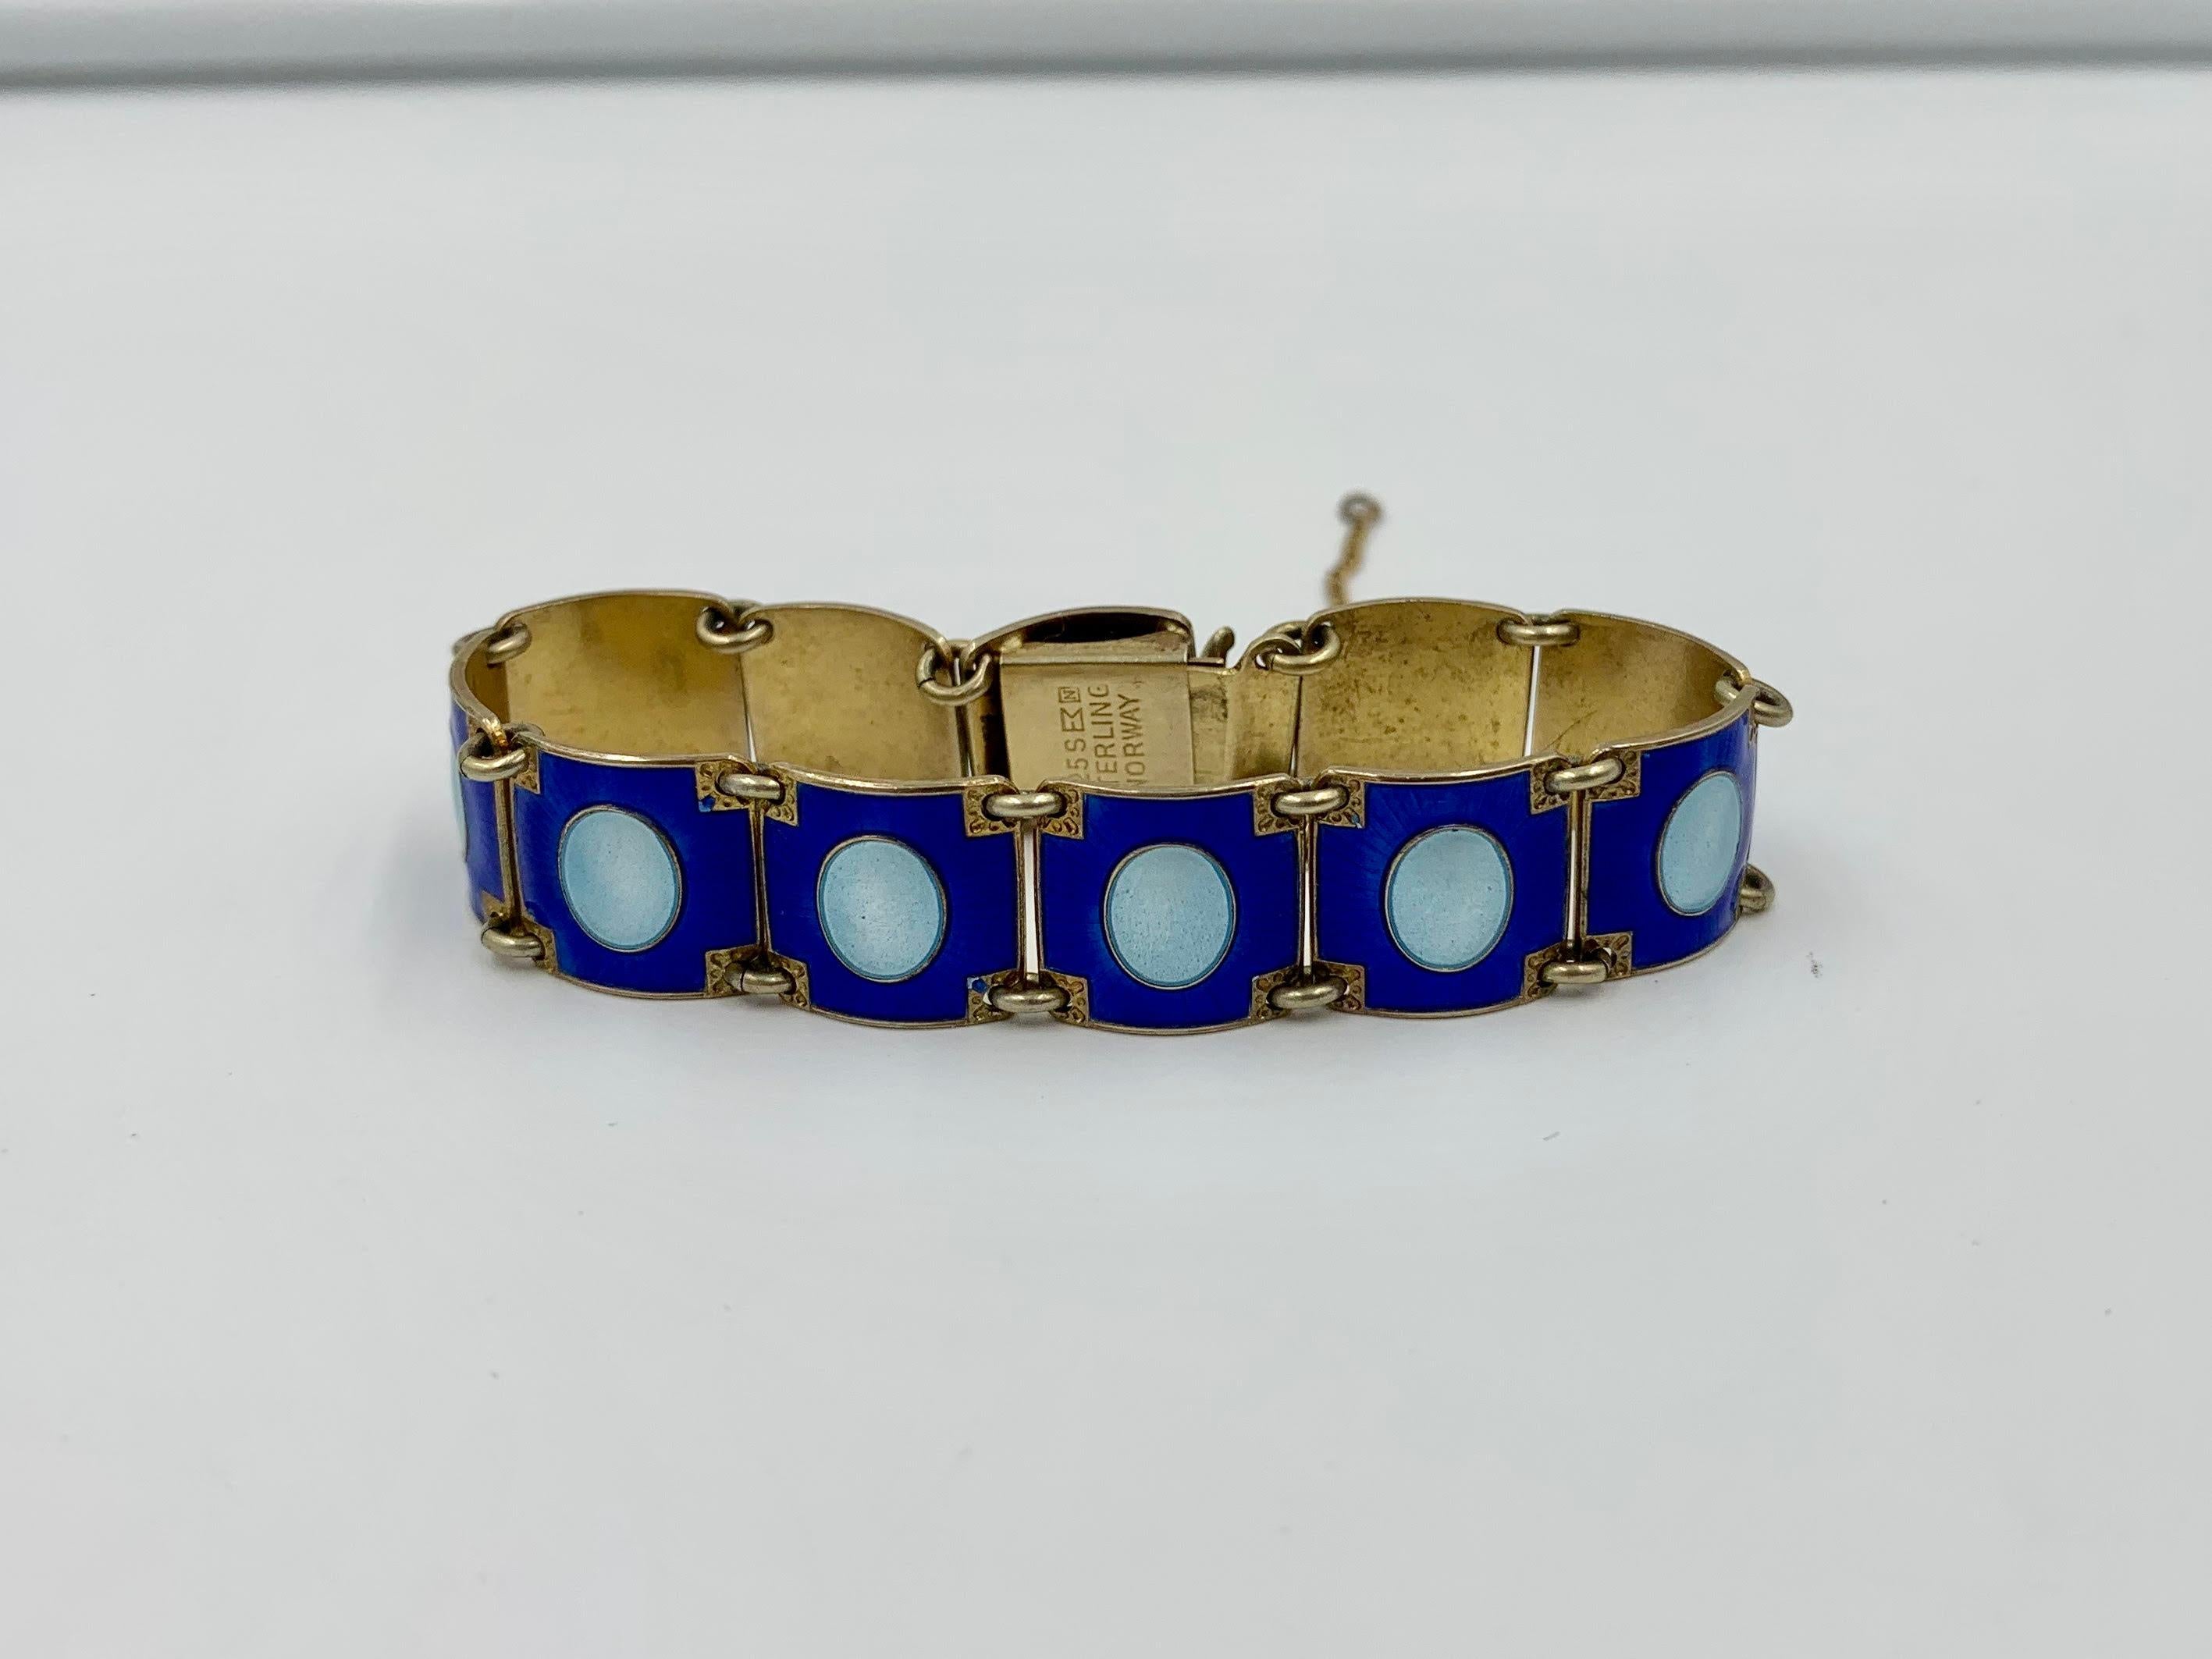 An exquisite Mid-Century Modern Eames Era period Bracelet by the esteemed Norwegian Silversmith Aksel Holmsen in an incredible blue and pale blue-green enamel design.  This bracelet is one of the most beautiful Scandinavian Enamel jewels we have